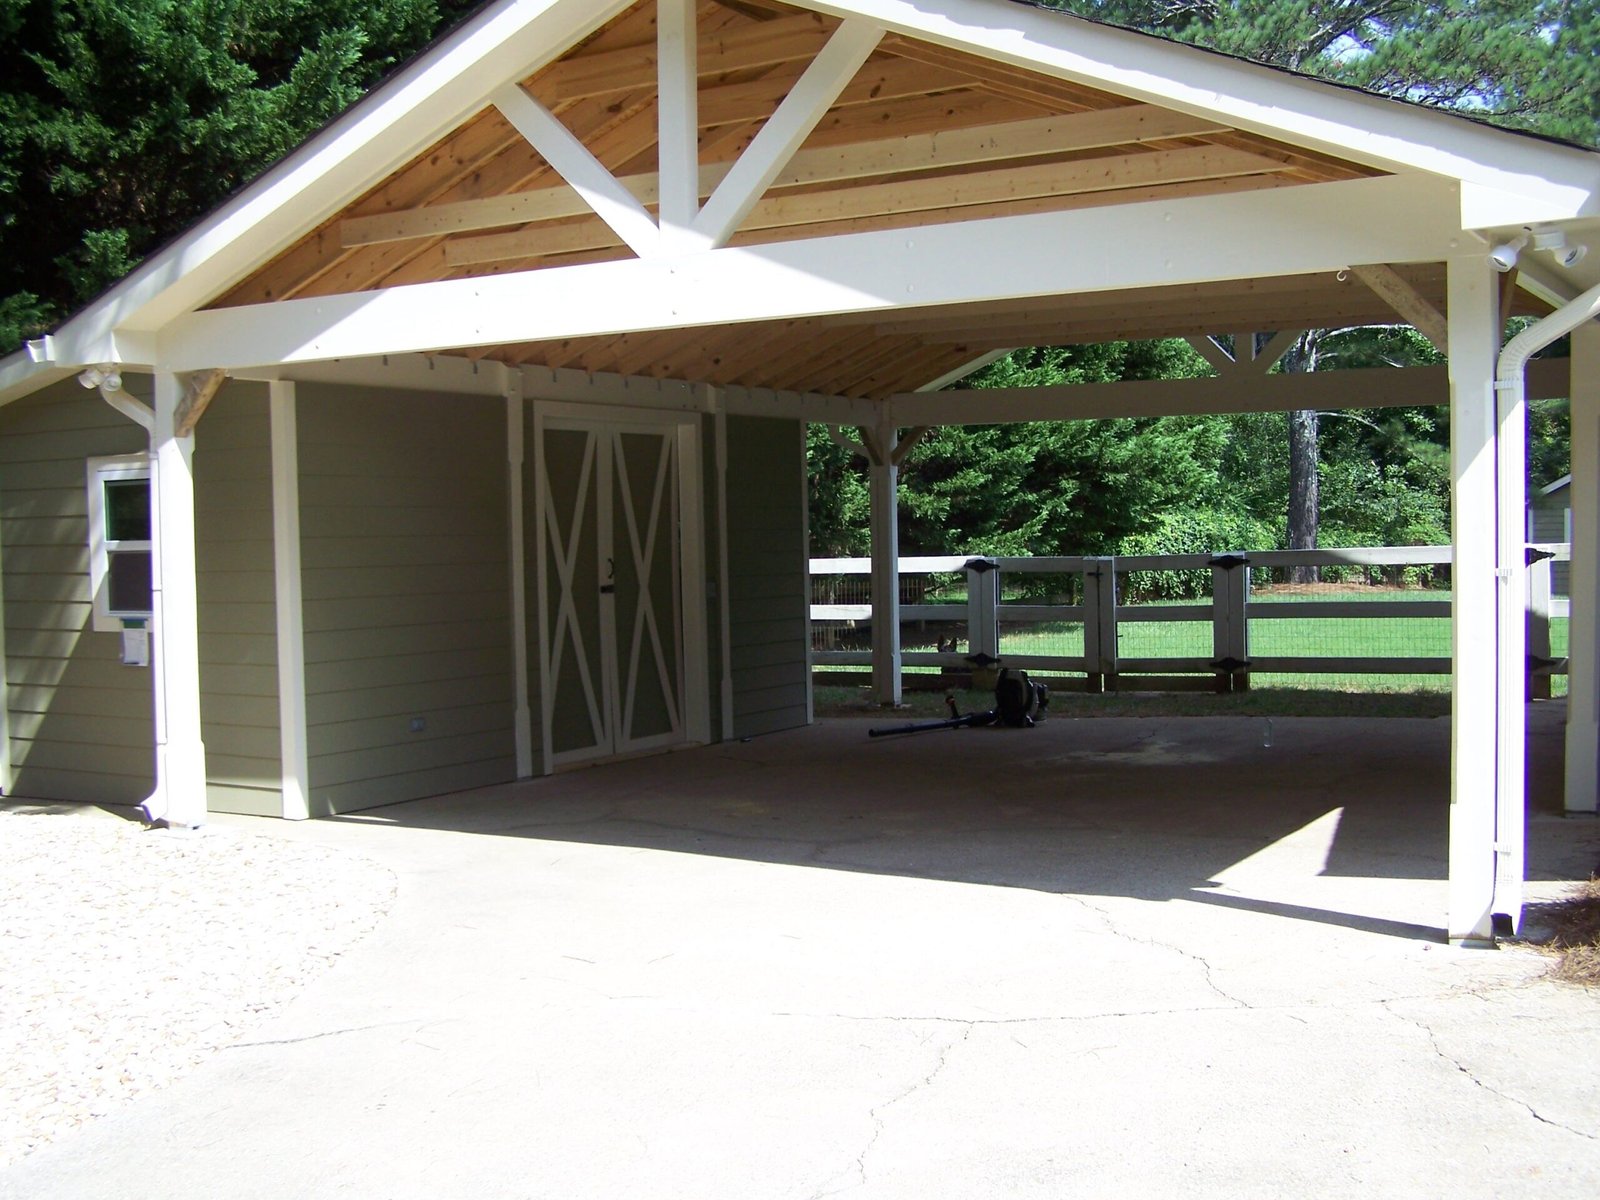 Top Questions to Ask Before Hiring a Carport Builder